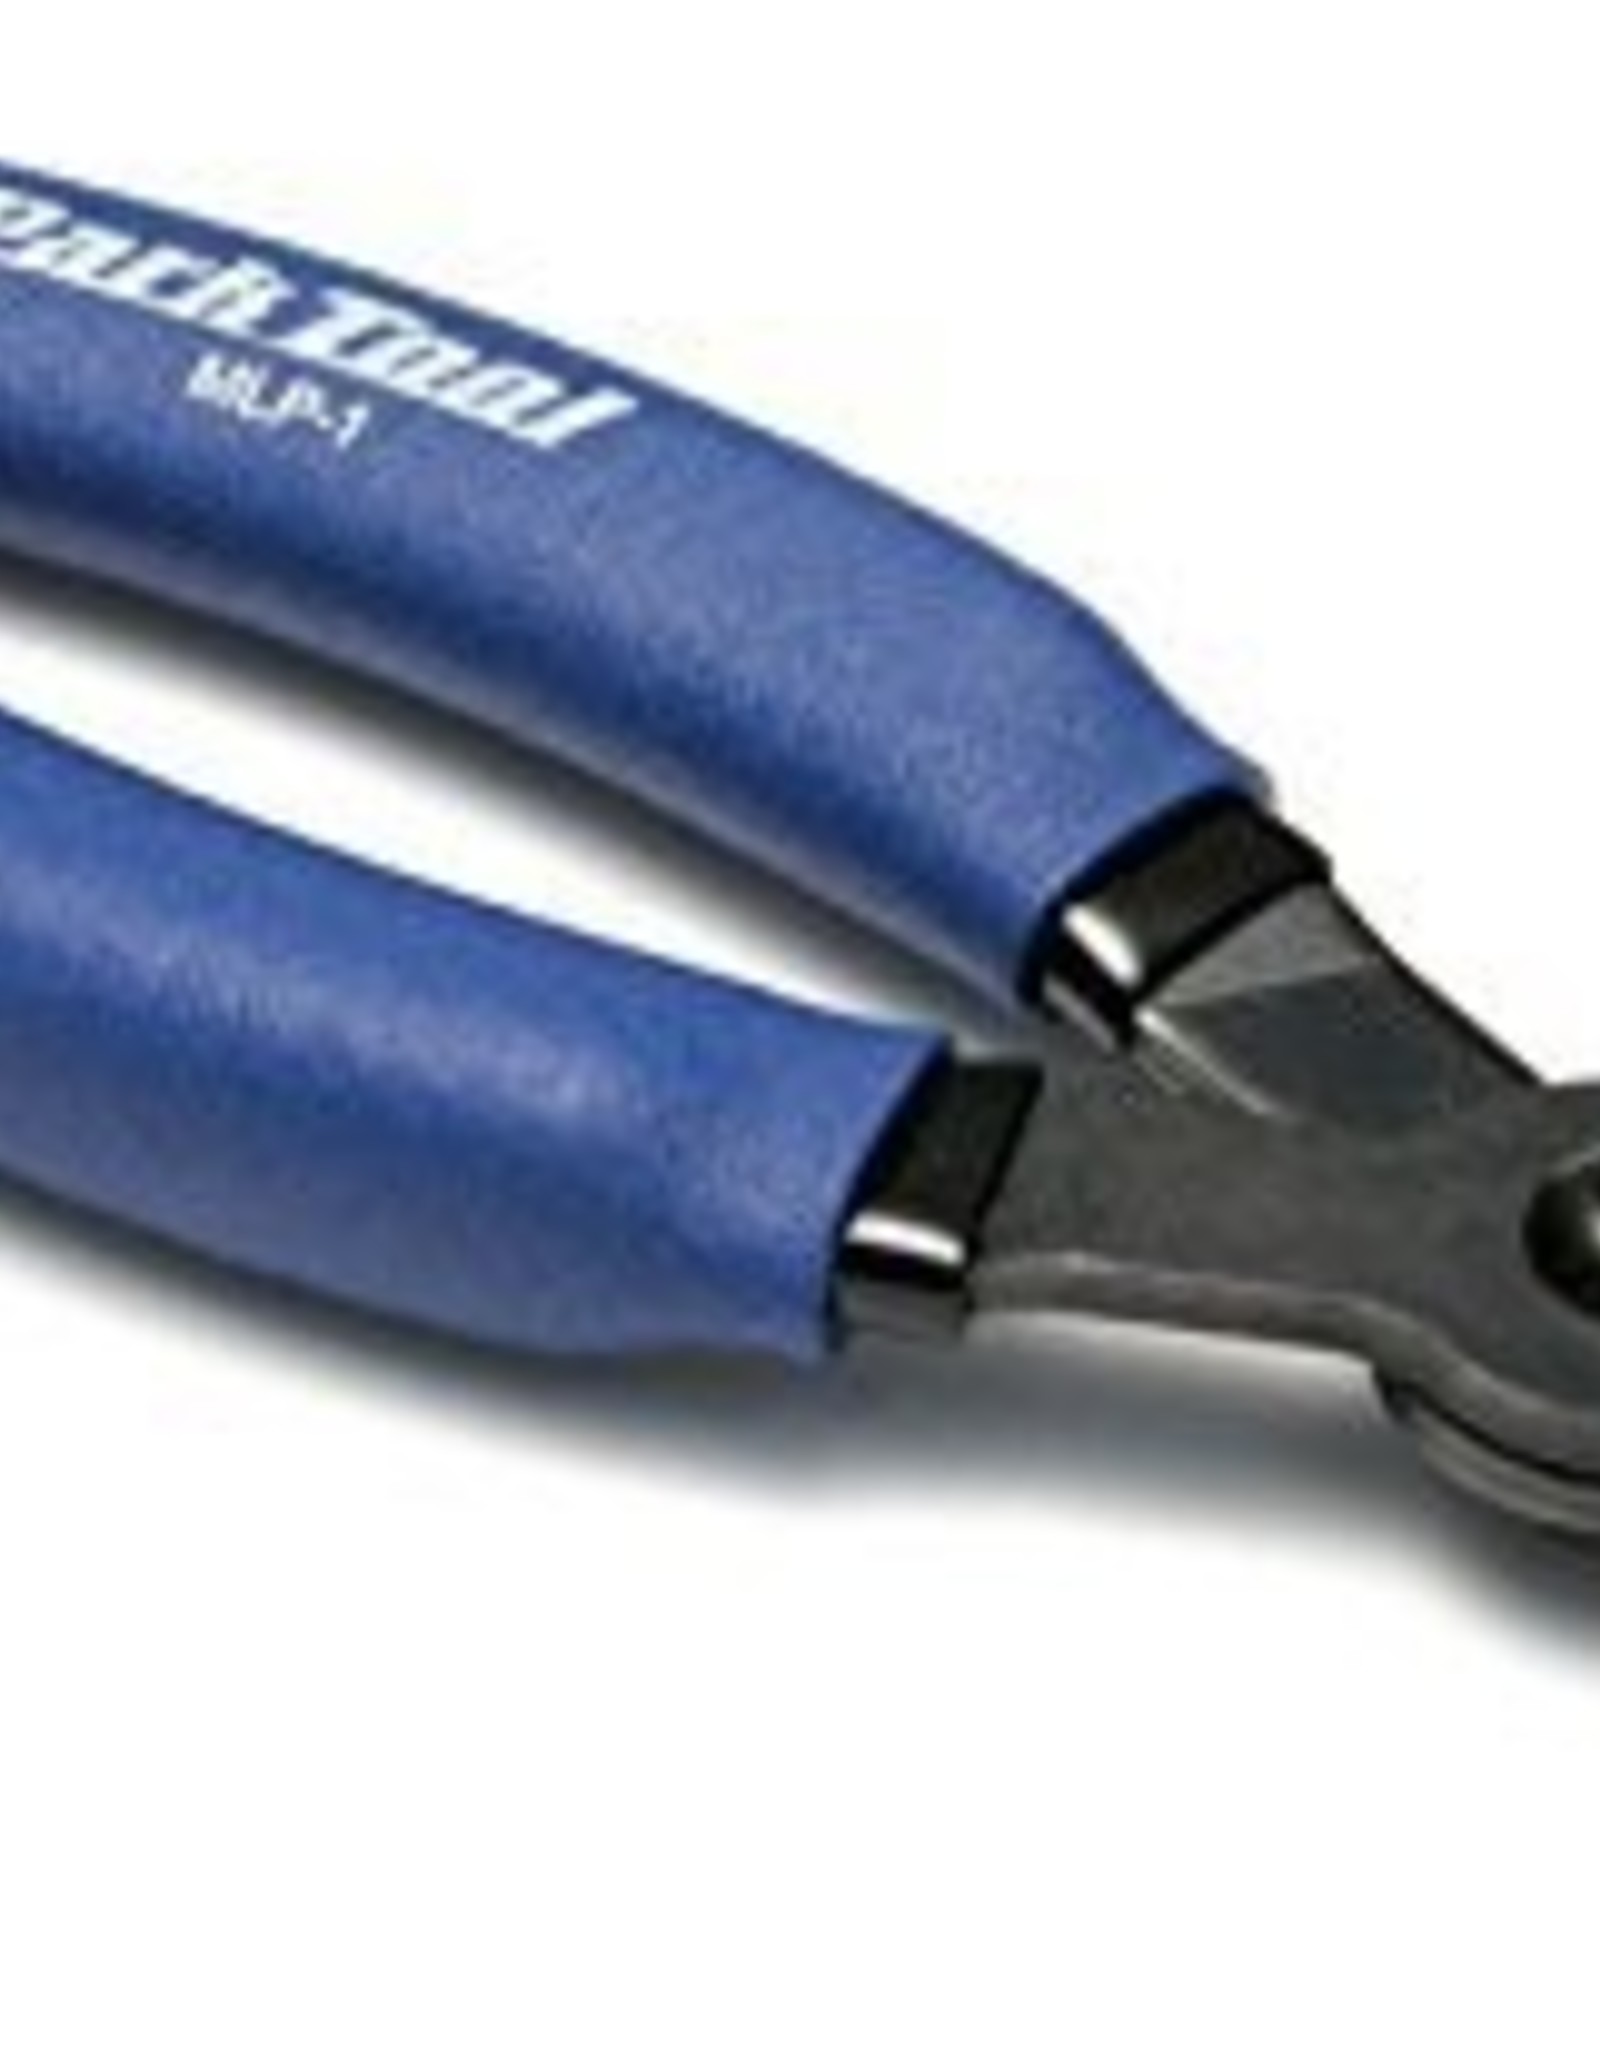 Park Tool Pince maille patente Park tool